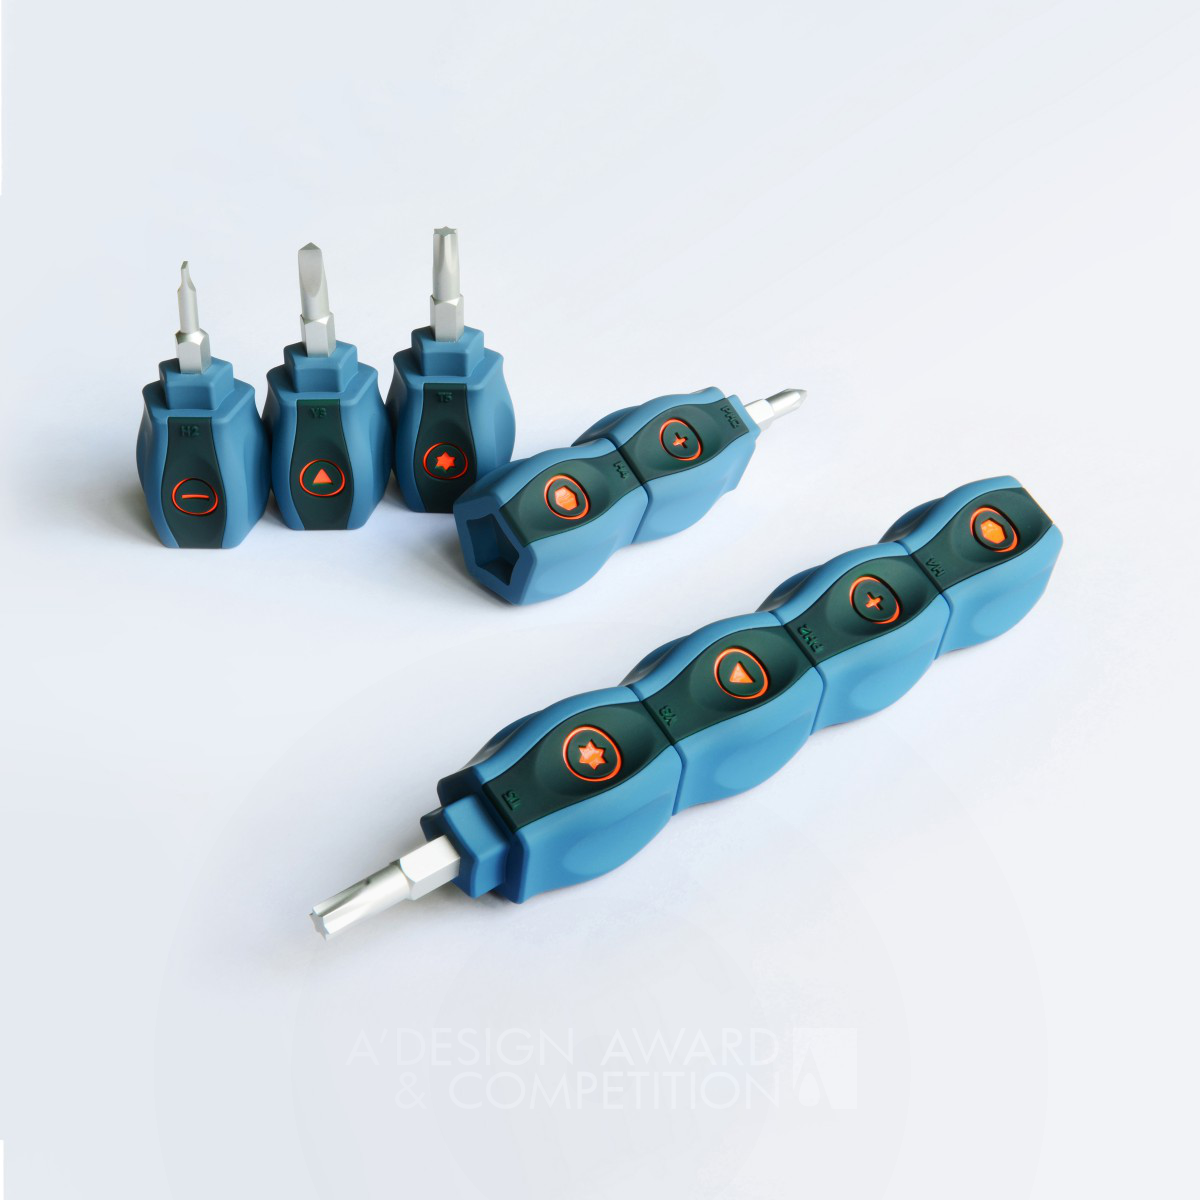 Wenkai Xue wins Silver at the prestigious A' Hardware, Power and Hand Tools Design Award with Plus+ Screwdriver.